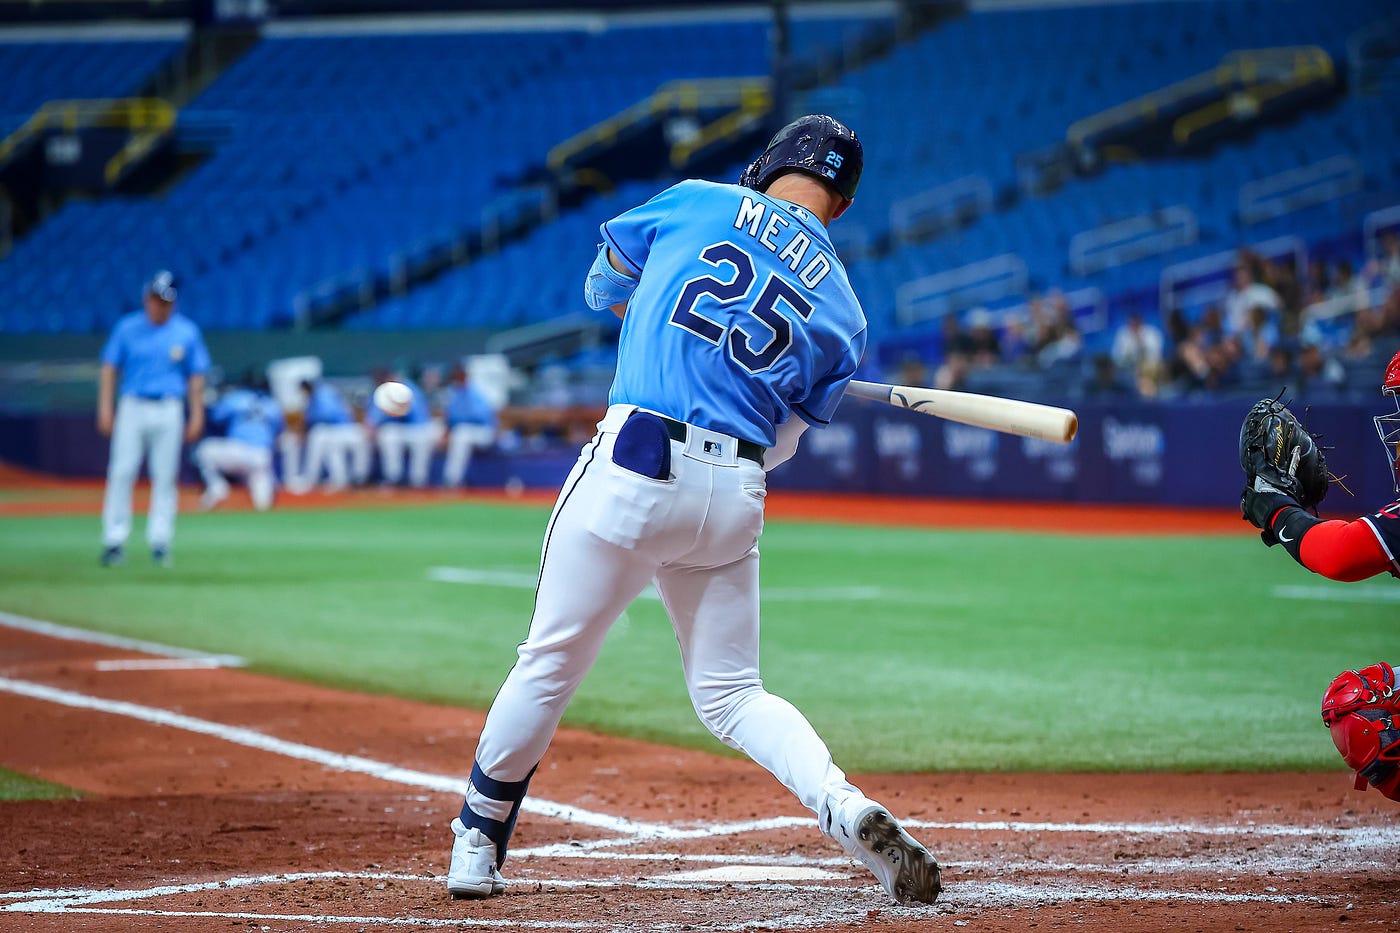 Tampa Bay Rays told they are out of running for Japanese two-way